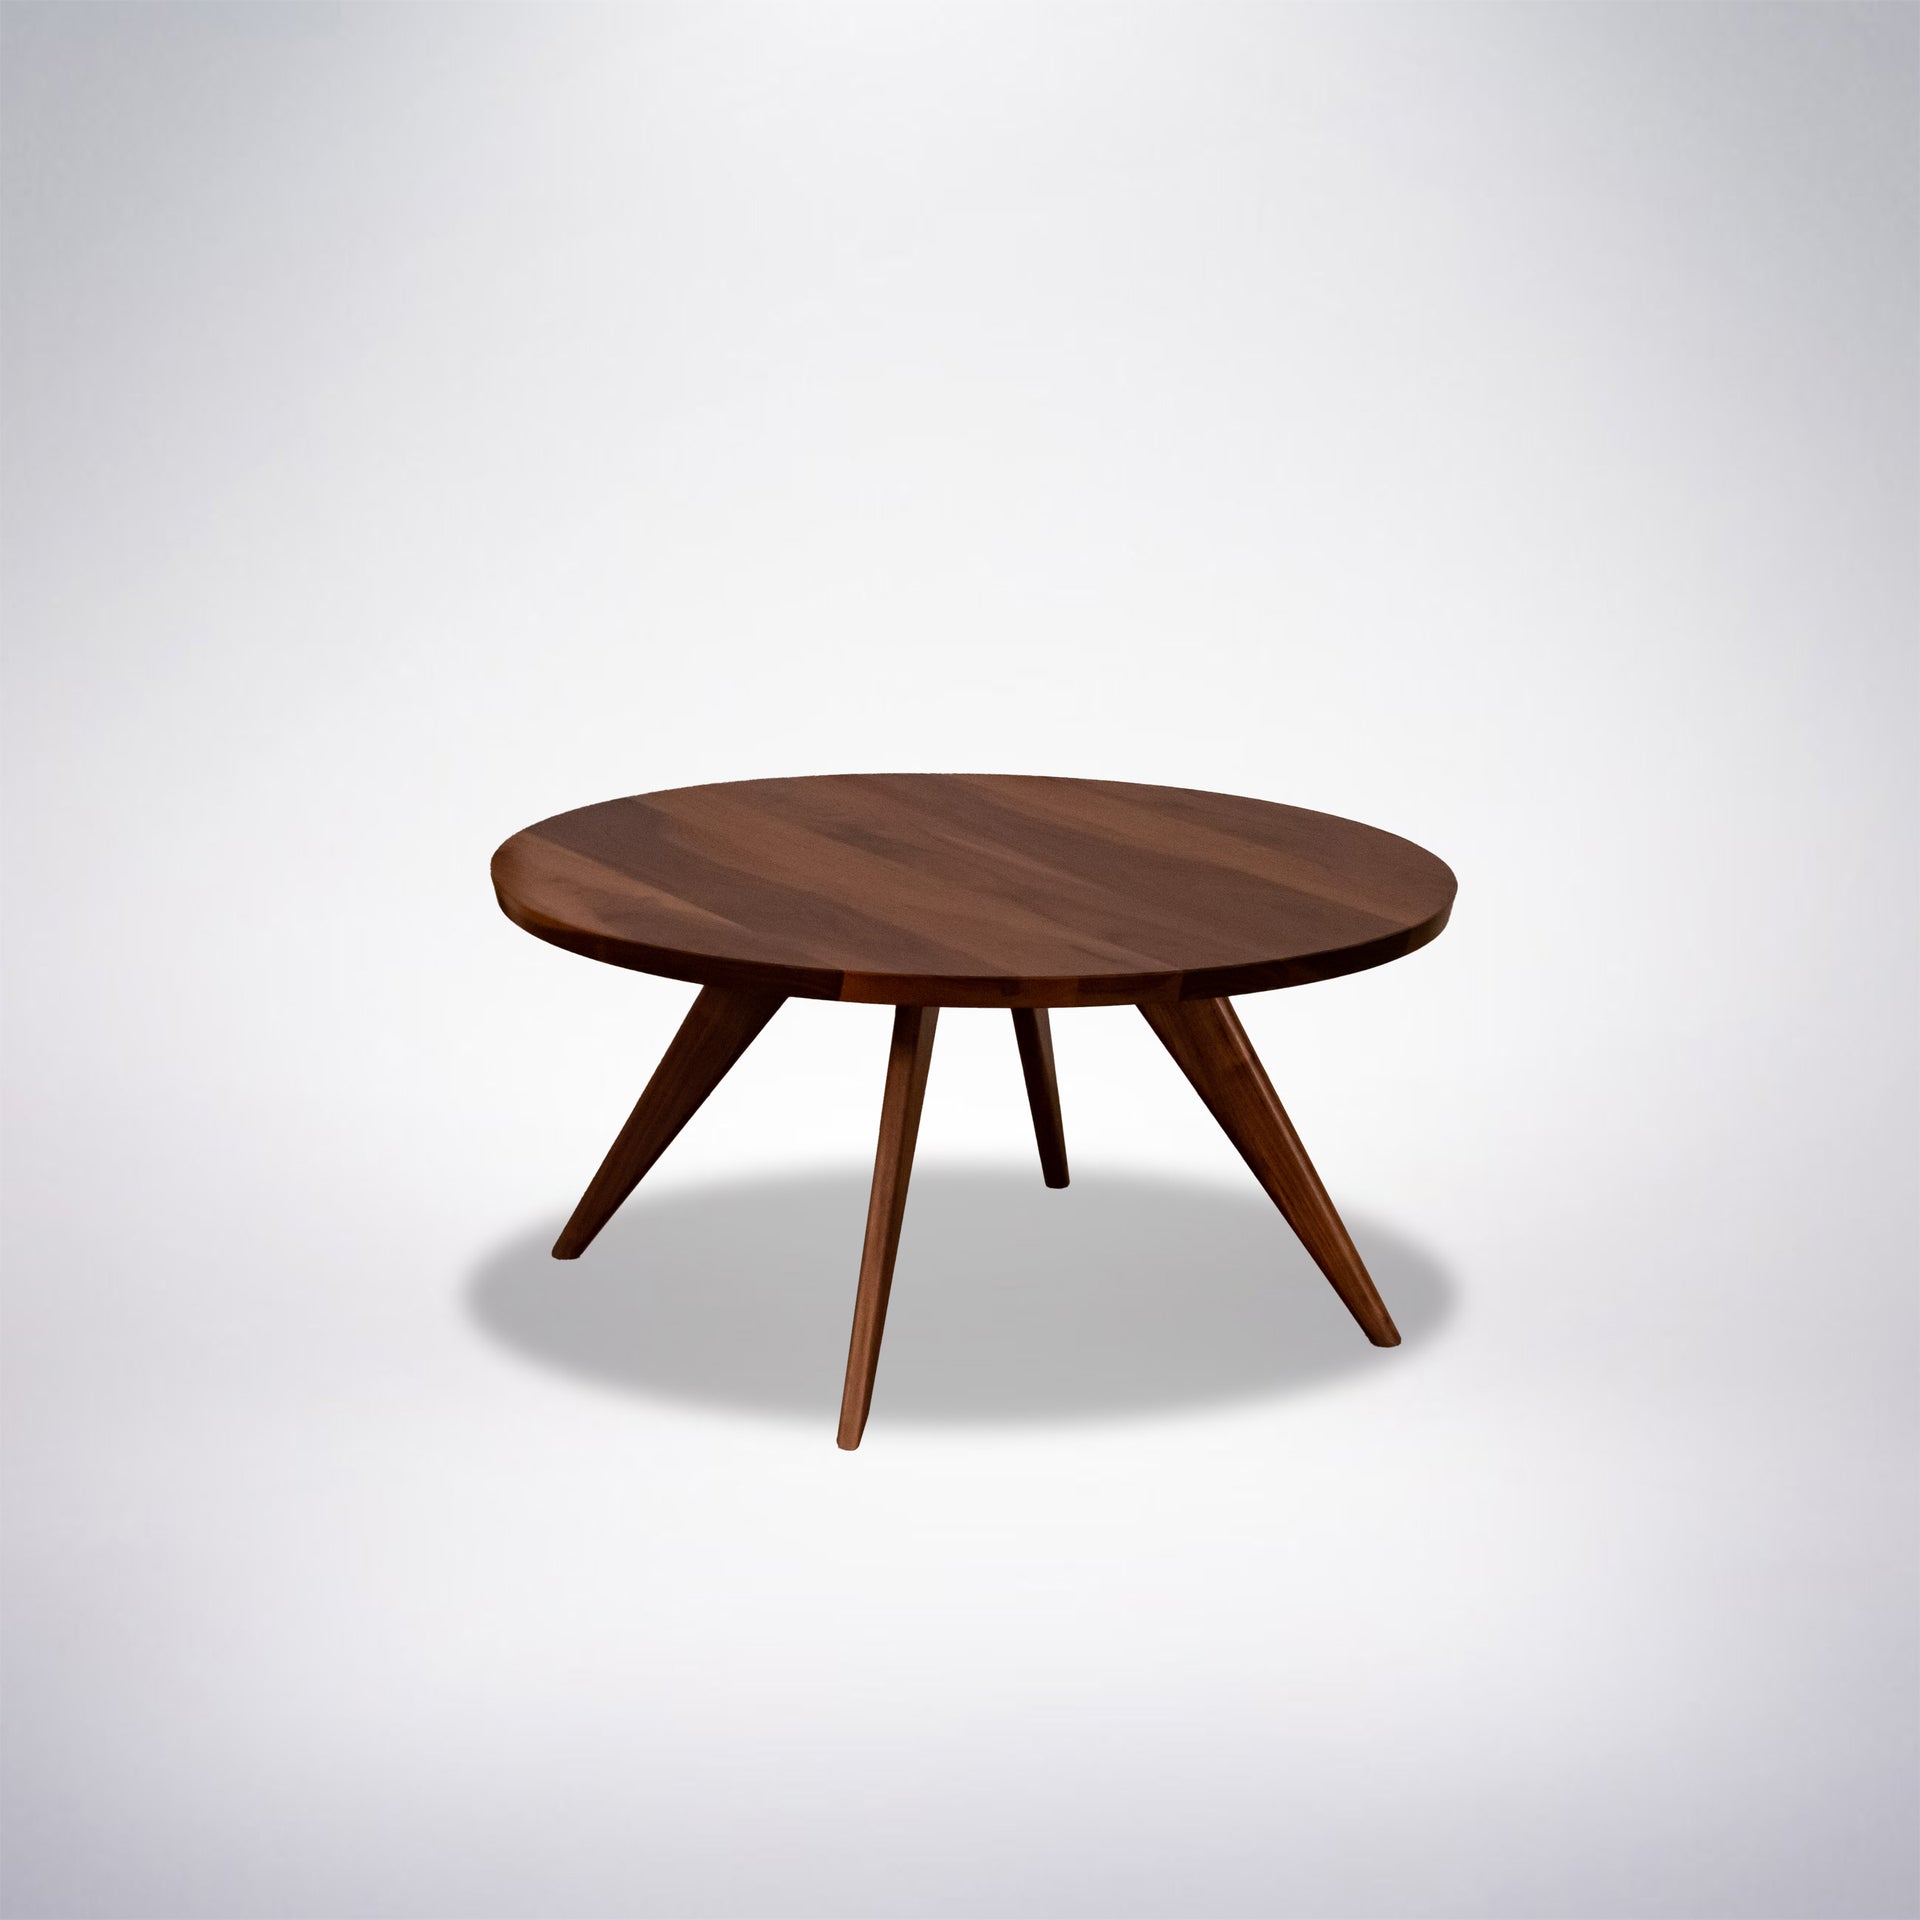 Round coffee table built from 100% solid wood